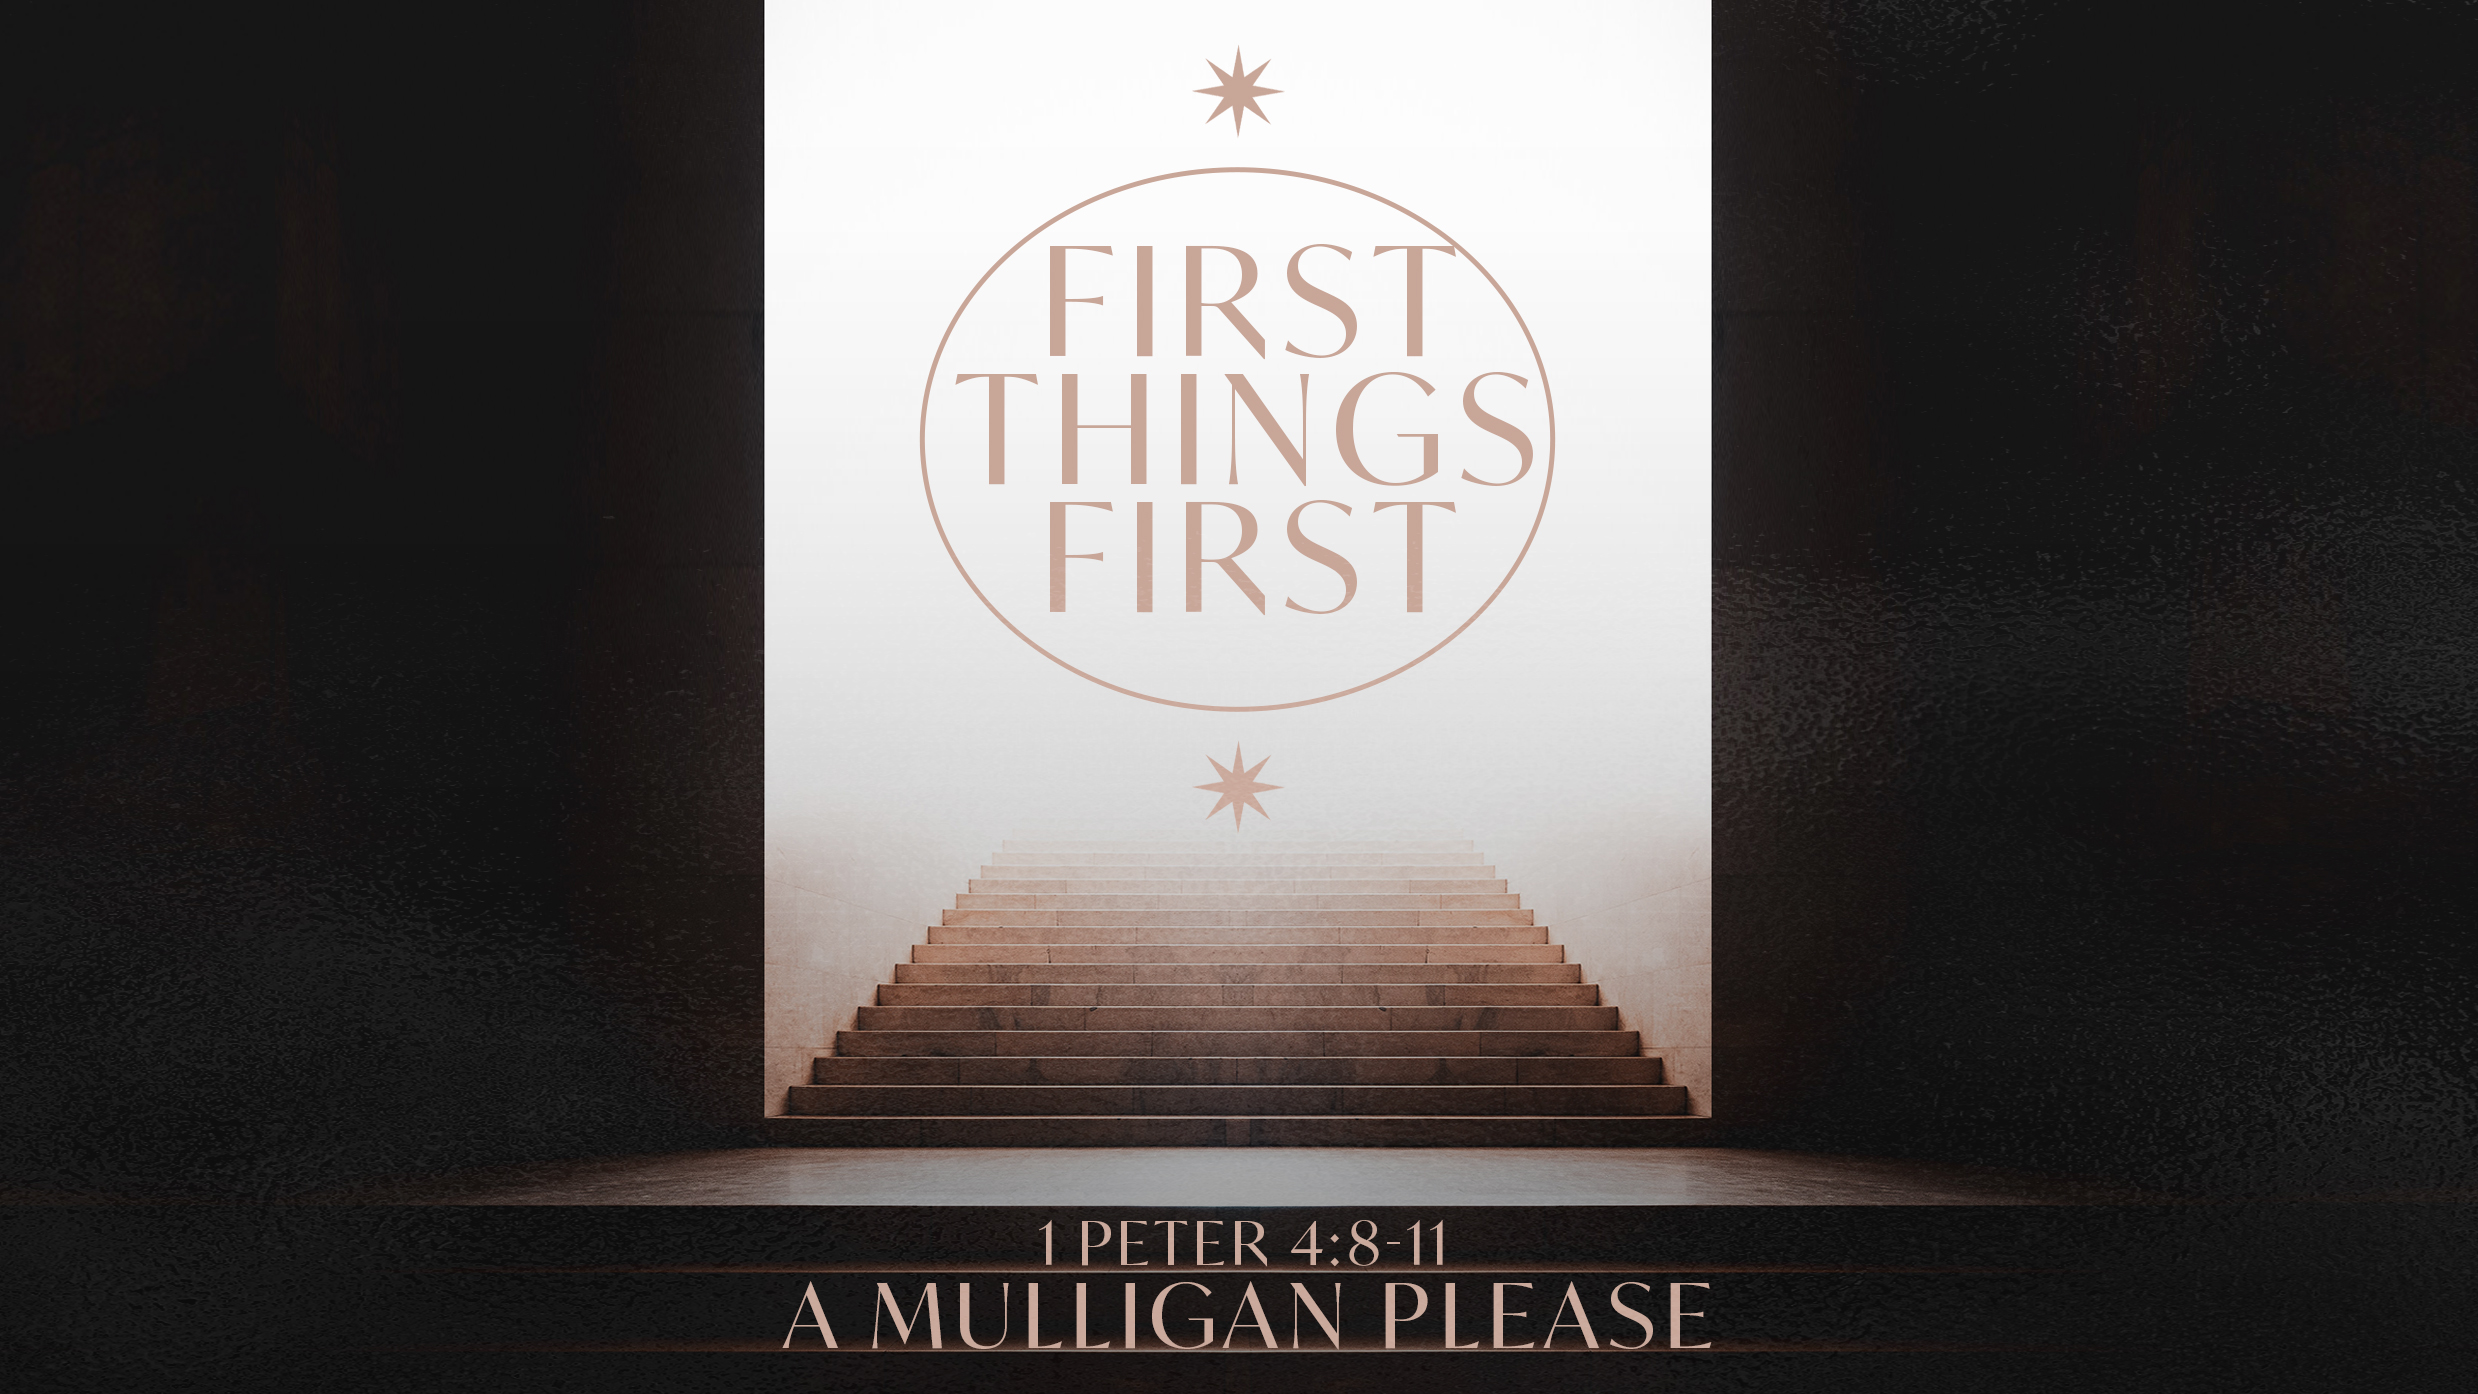 First Things First PART 3 “A MULLIGAN PLEASE” (THRIVE Service)